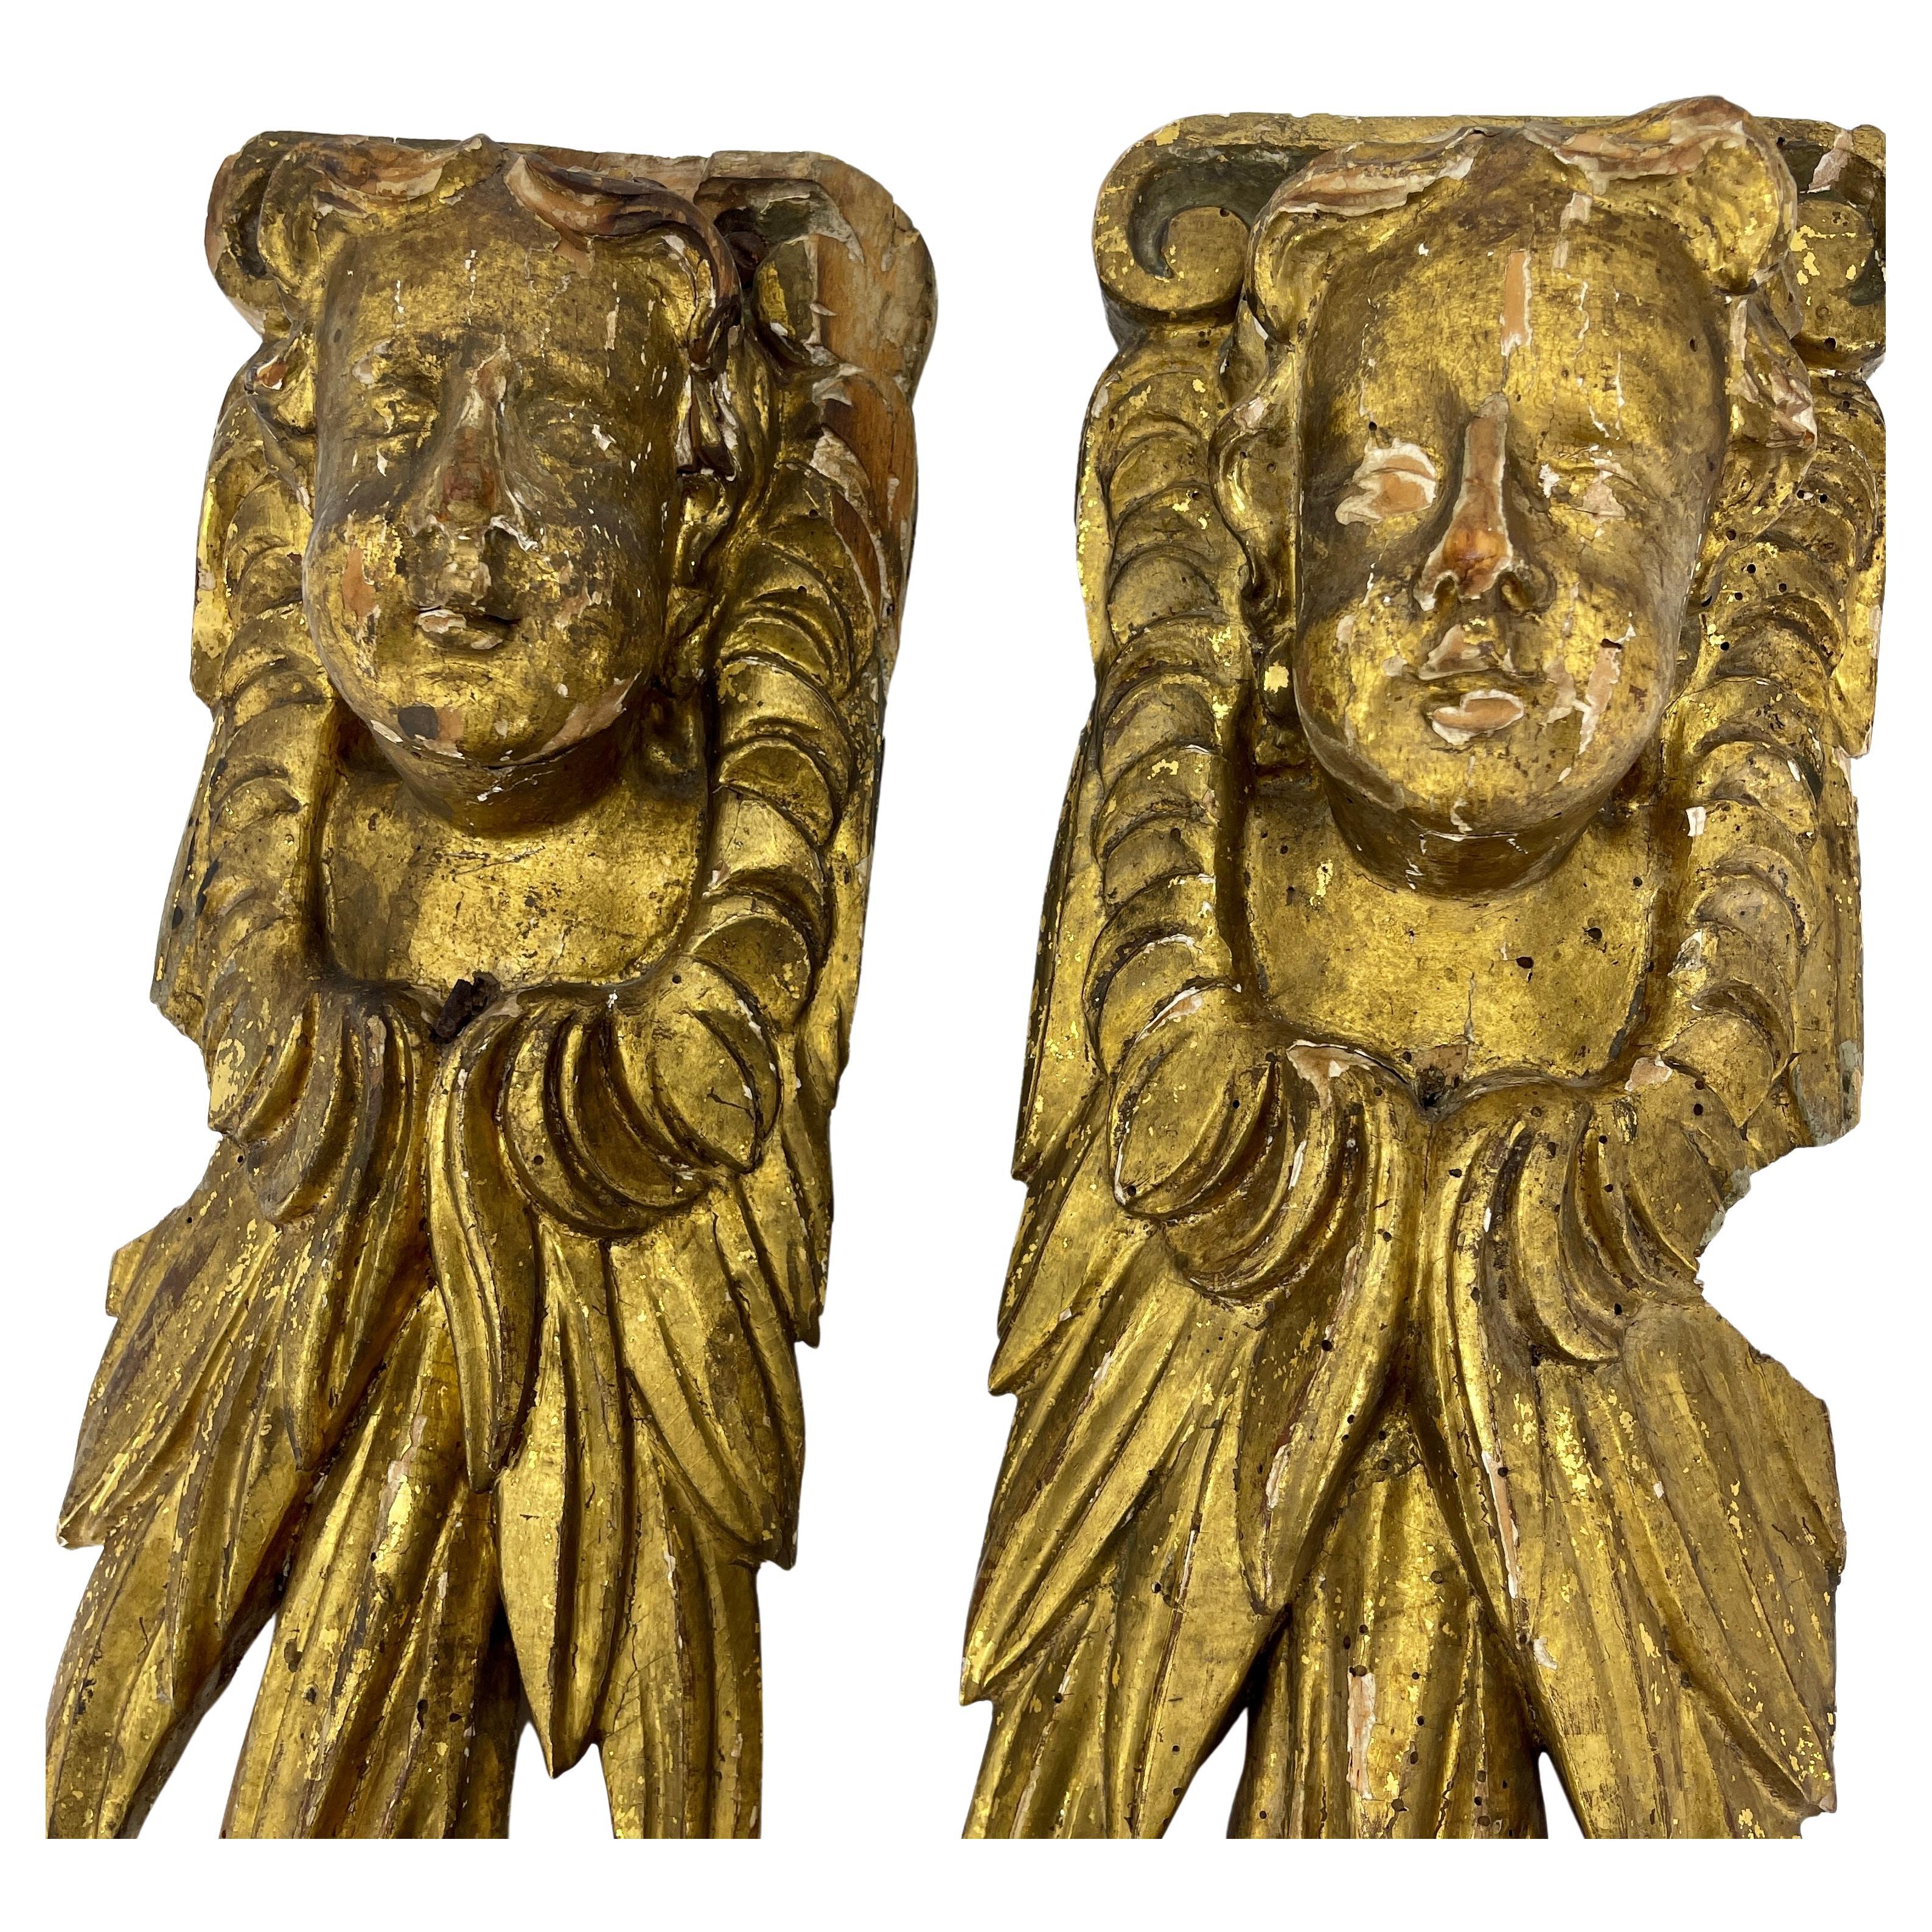 Pair of Italian Figural Gilt Wood Cherubs Architectural Pilaster Wall sculptures, Baroque, circa 1740.
Note that the faces on theses sculptures are individually carved to look towards each other. This is rare because it shows that these were part of